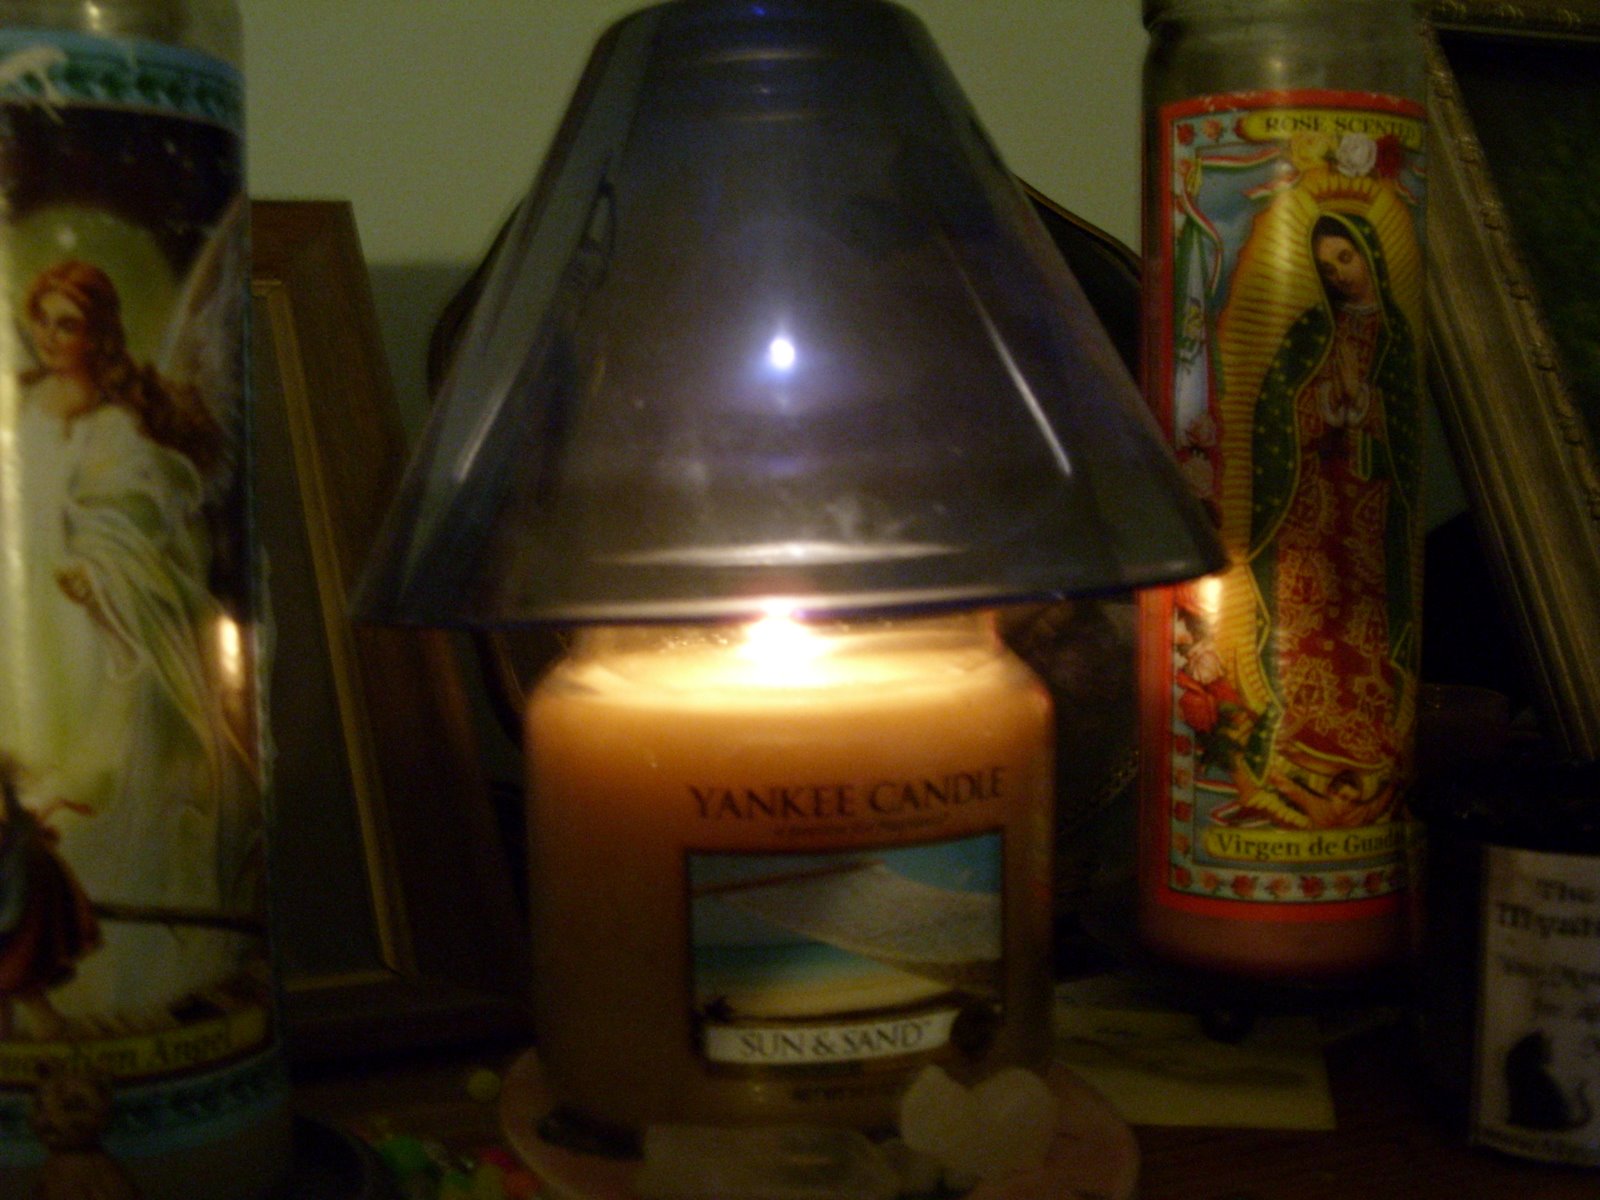 [crickey+and+candle+008.jpg]